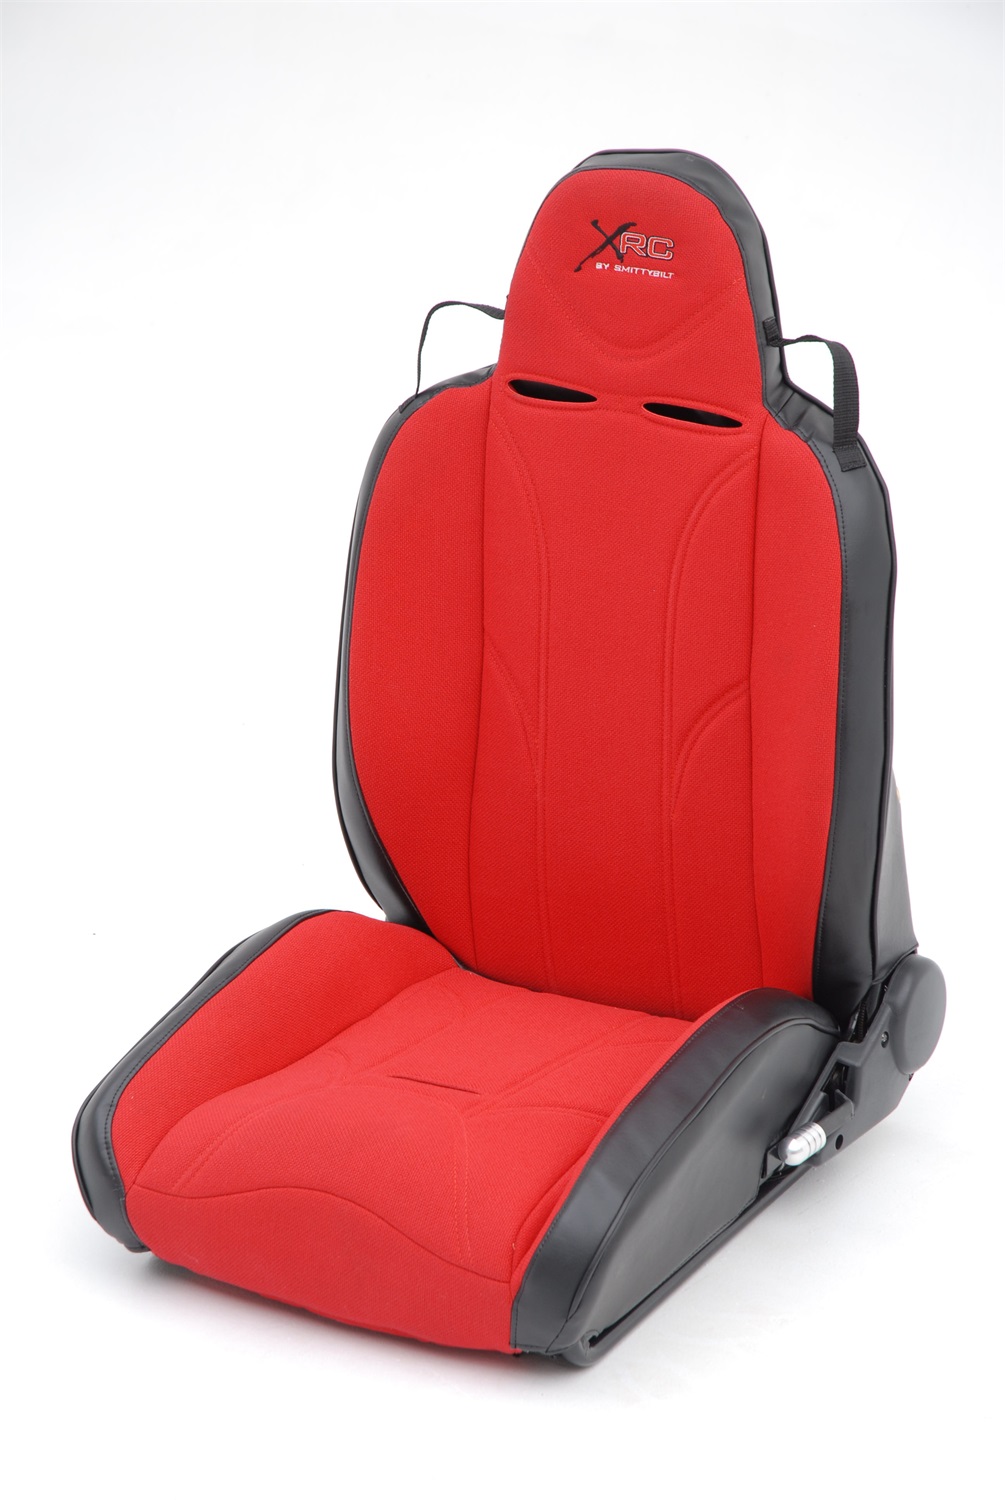 Show details for Smittybilt 757130 Xrc Red On Black Rear Seat Cover